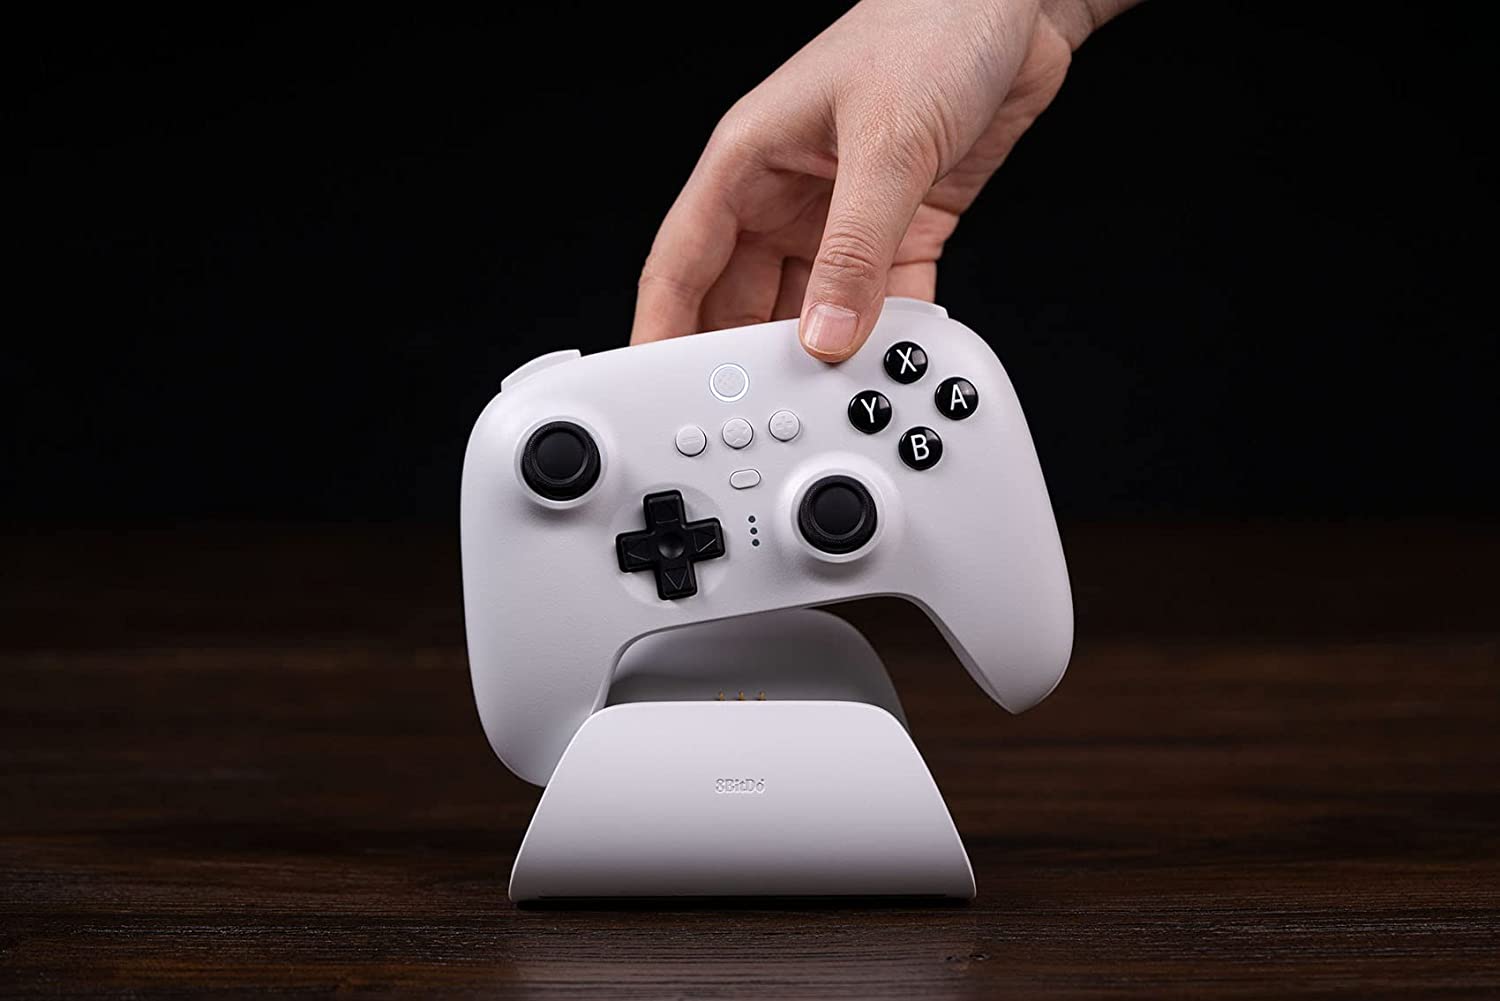 8BitDo Ultimate Bluetooth Controller w/ Charging Dock (White)